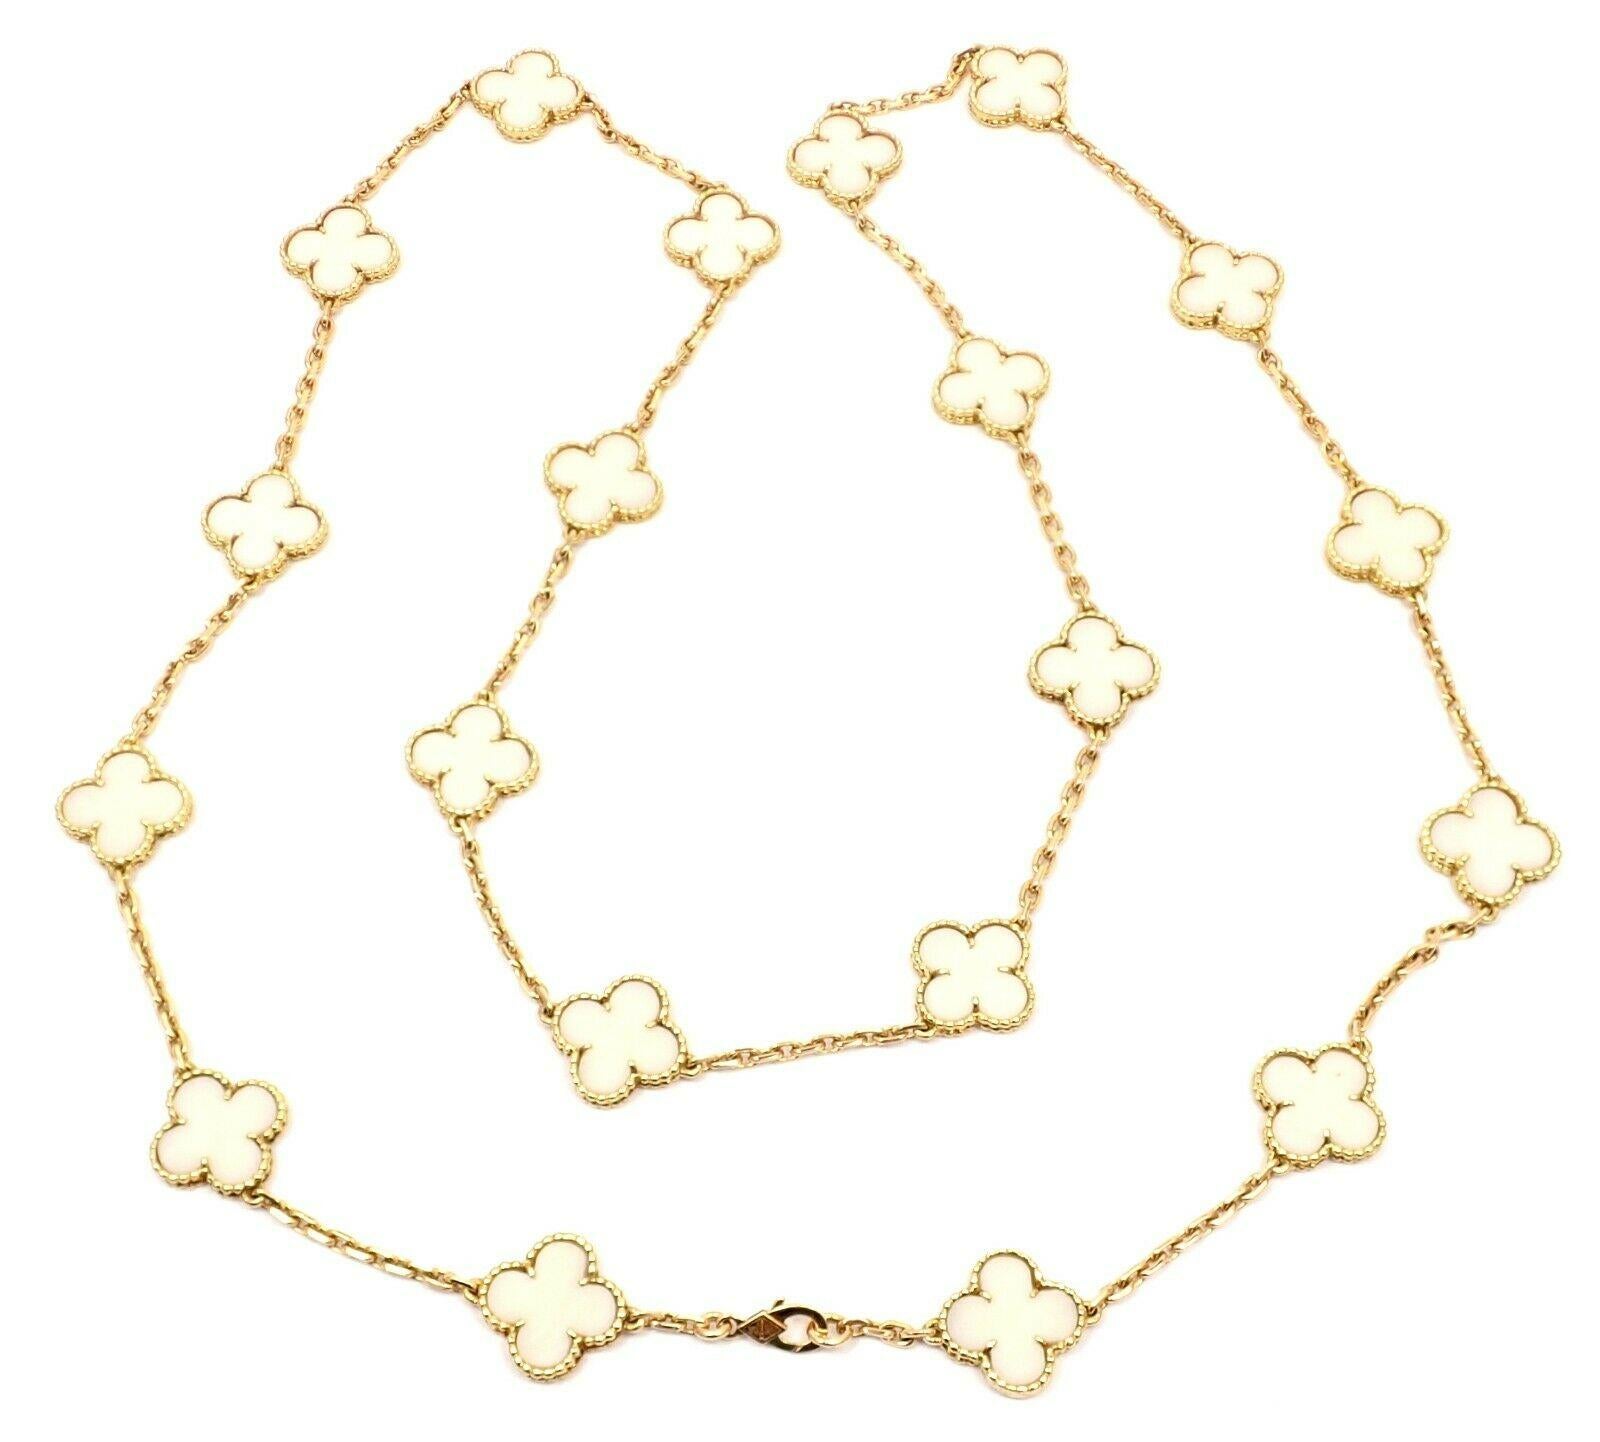 Van Cleef & Arpels Vintage White Coral 20 Motifs Alhambra Yellow Gold Necklace. 
With 20 motifs of white coral alhambra stones 15mm each 
*** This is an extremely rare, early, highly collectible white coral alhambra necklace by Van Cleef &Arpels***